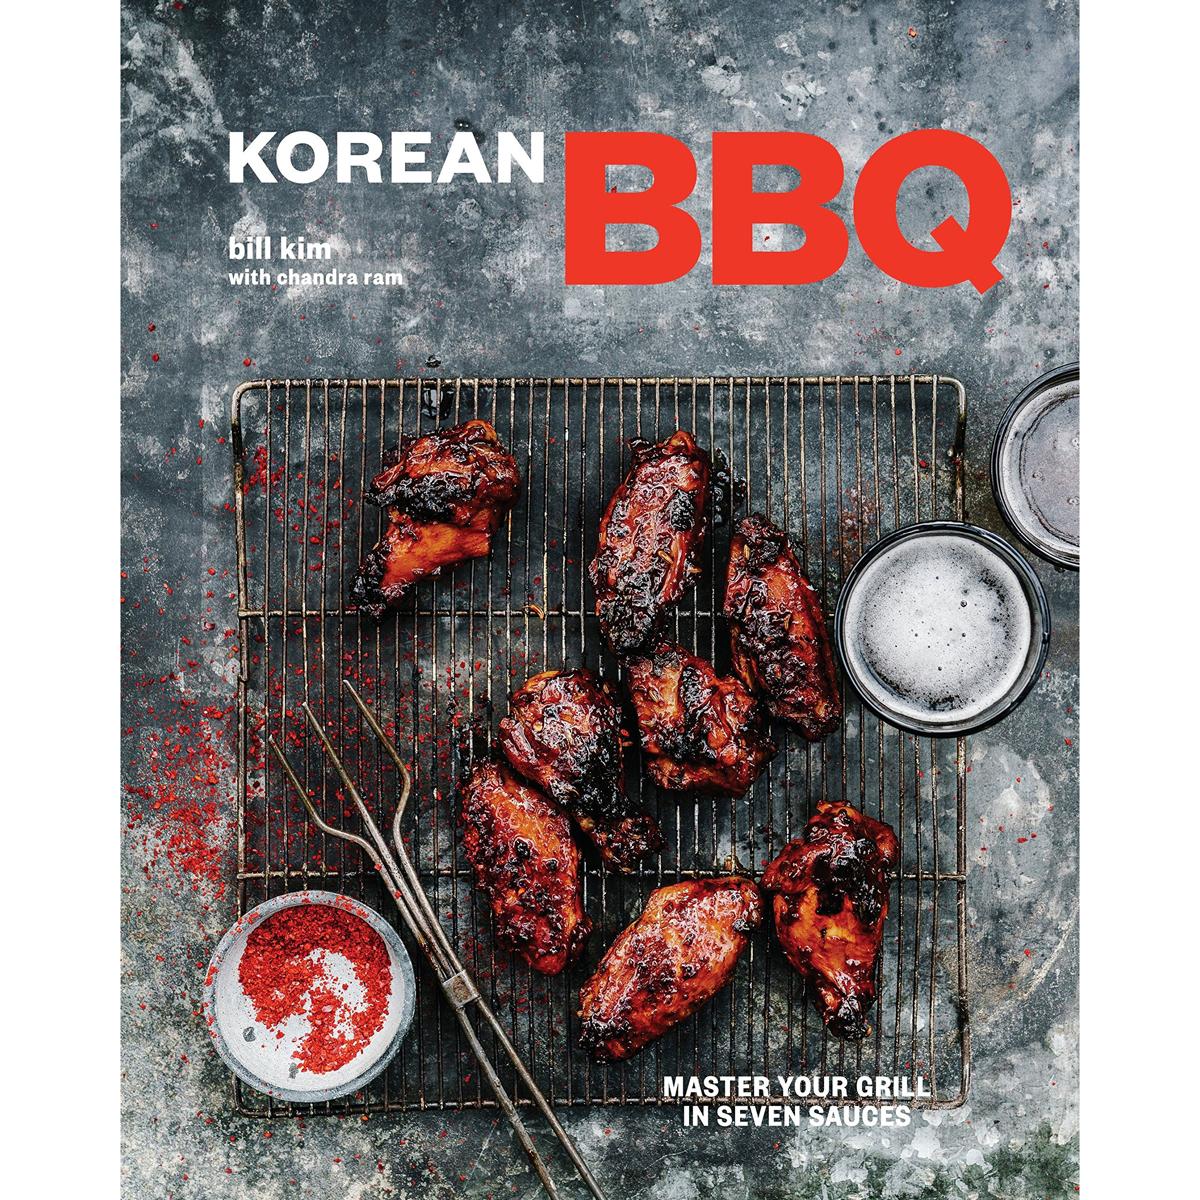 Korean BBQ Master Your Grill in Seven Sauces Cookbook eBook for $1.99